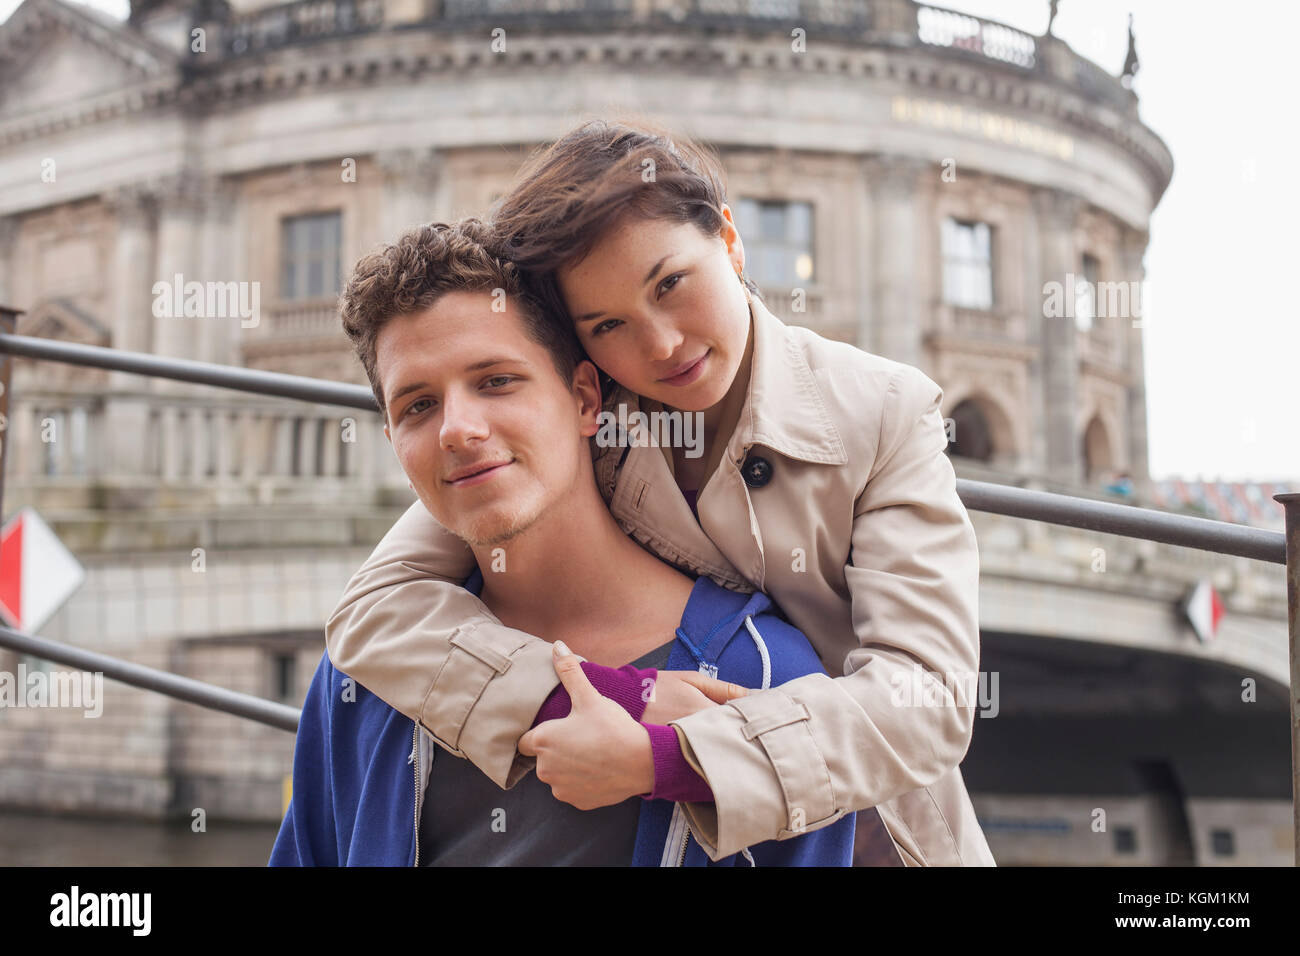 Low angle portrait of woman embracing male friend against Bode Museum, Berlin, Germany Stock Photo